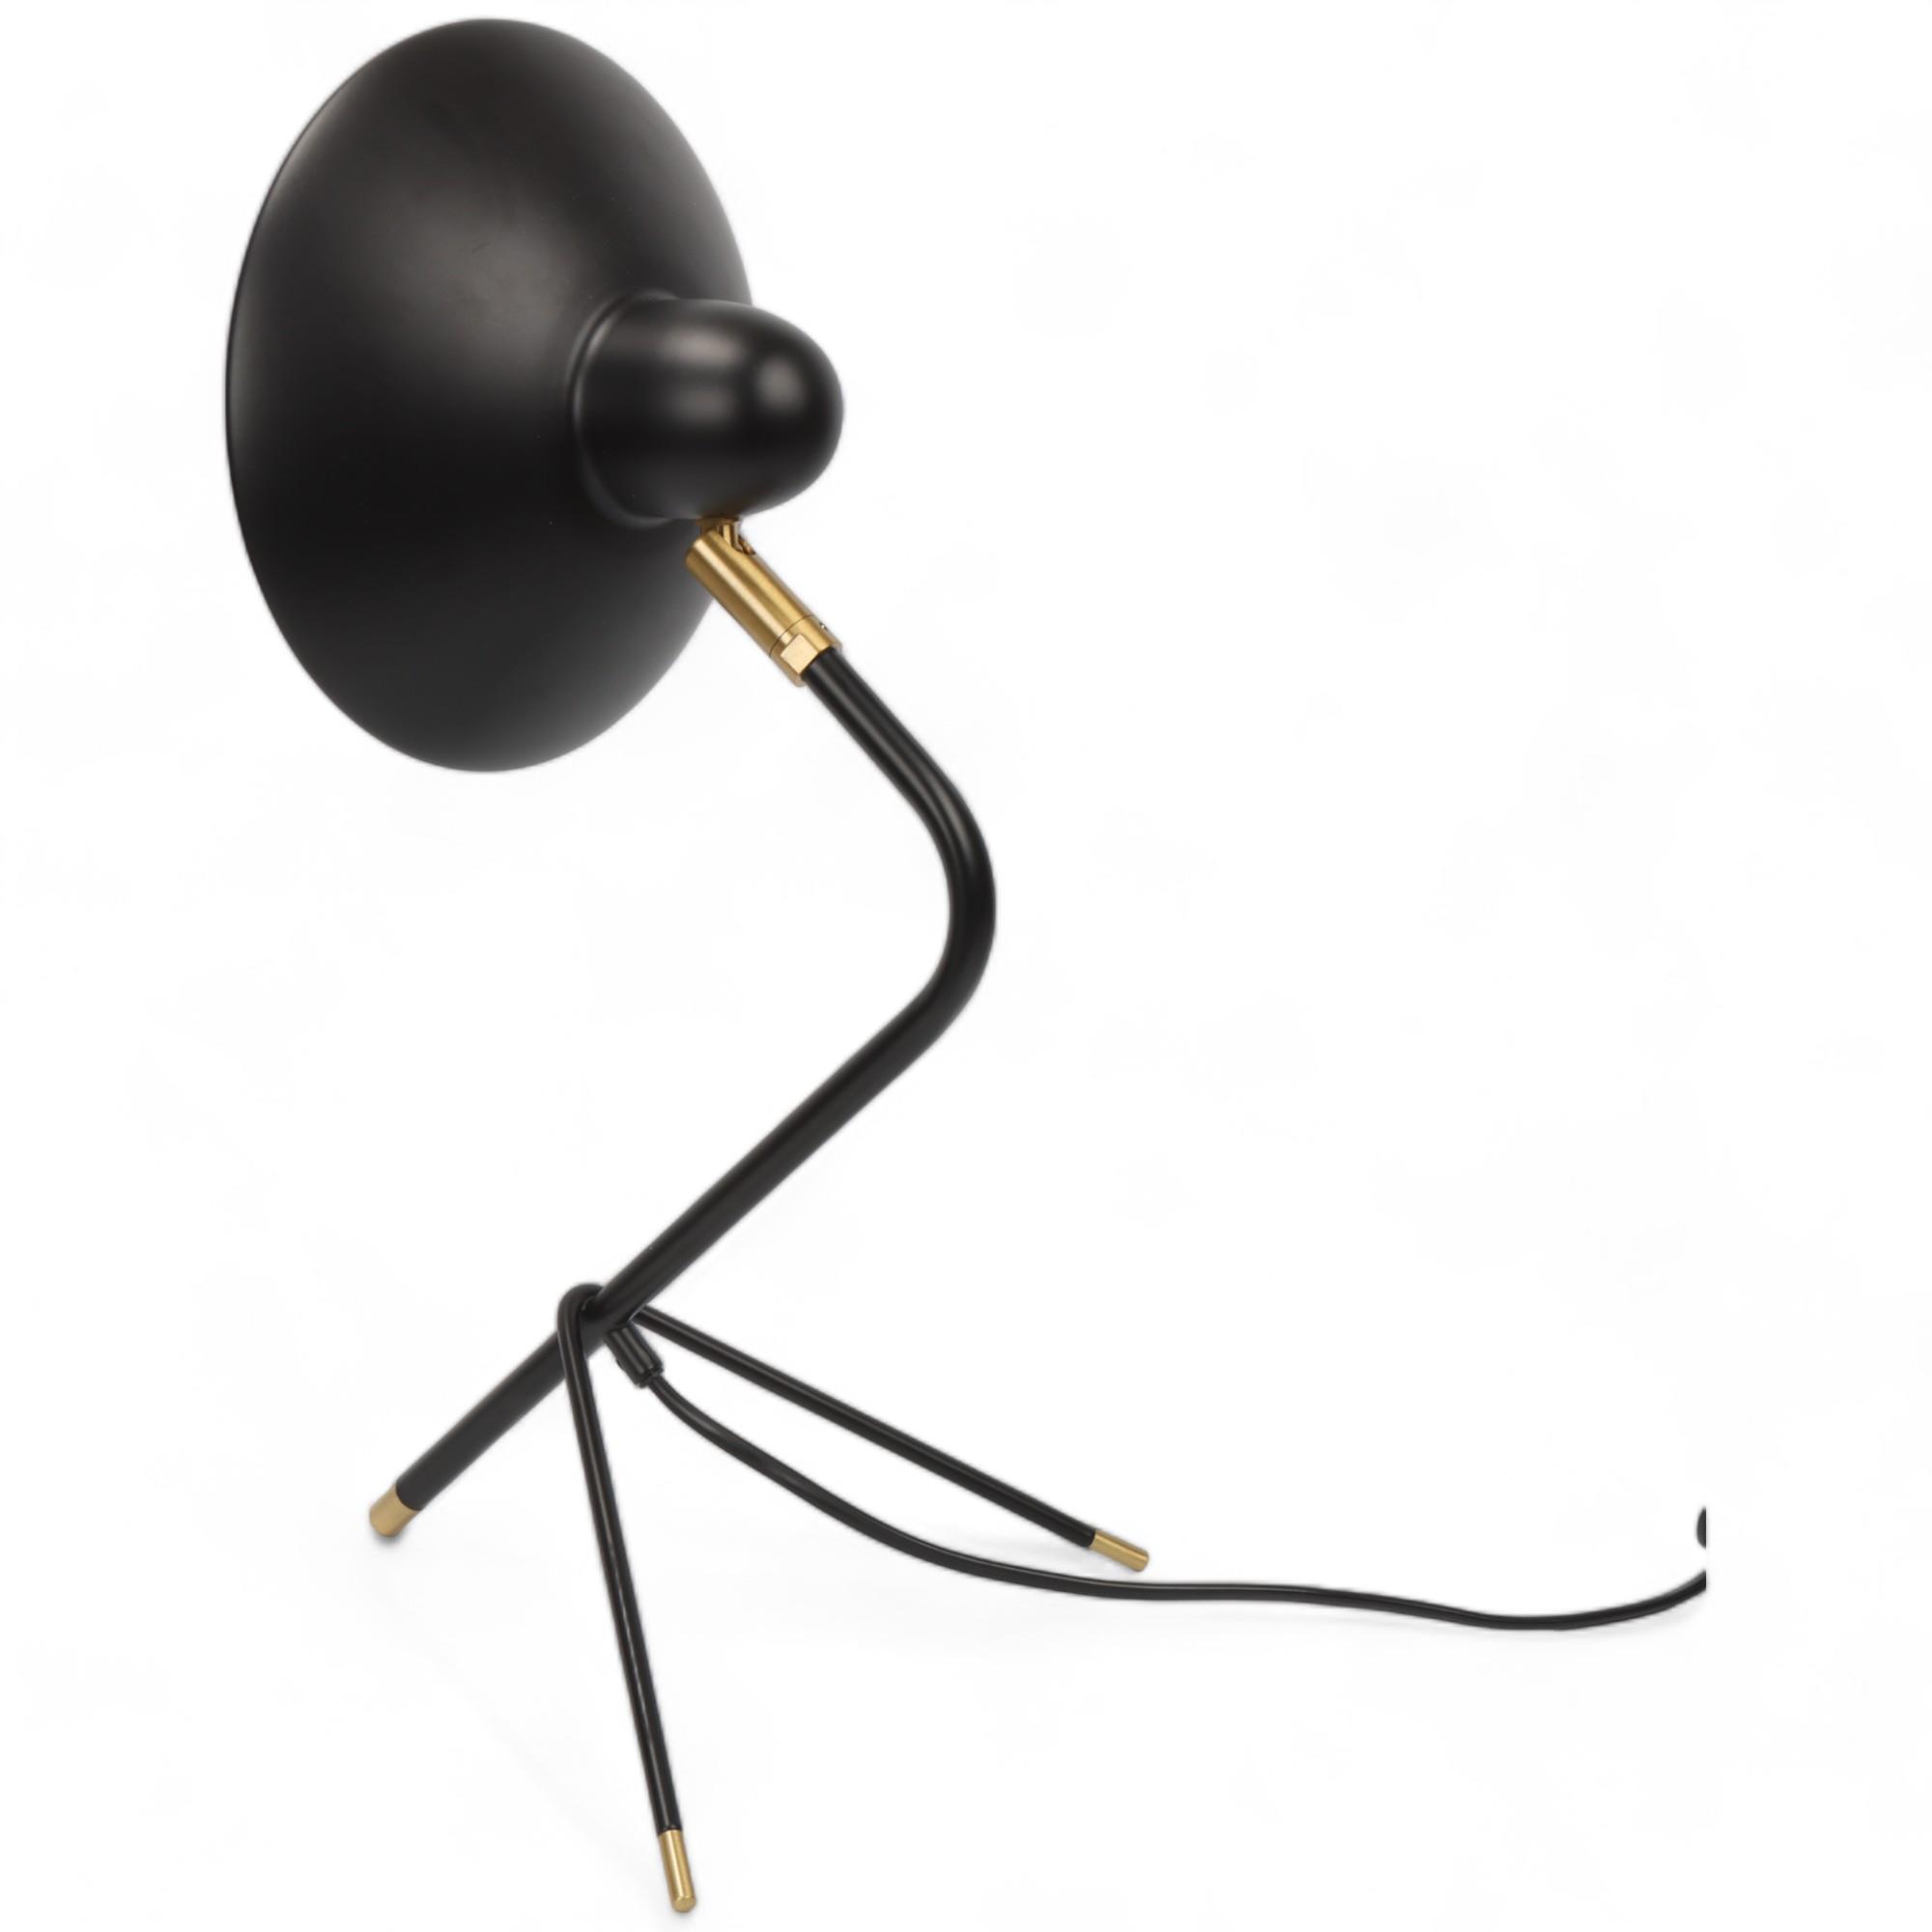 Di Classe, an Arles mid-century style desk lamp by DMEI ENDO with adjustable shade, approx height